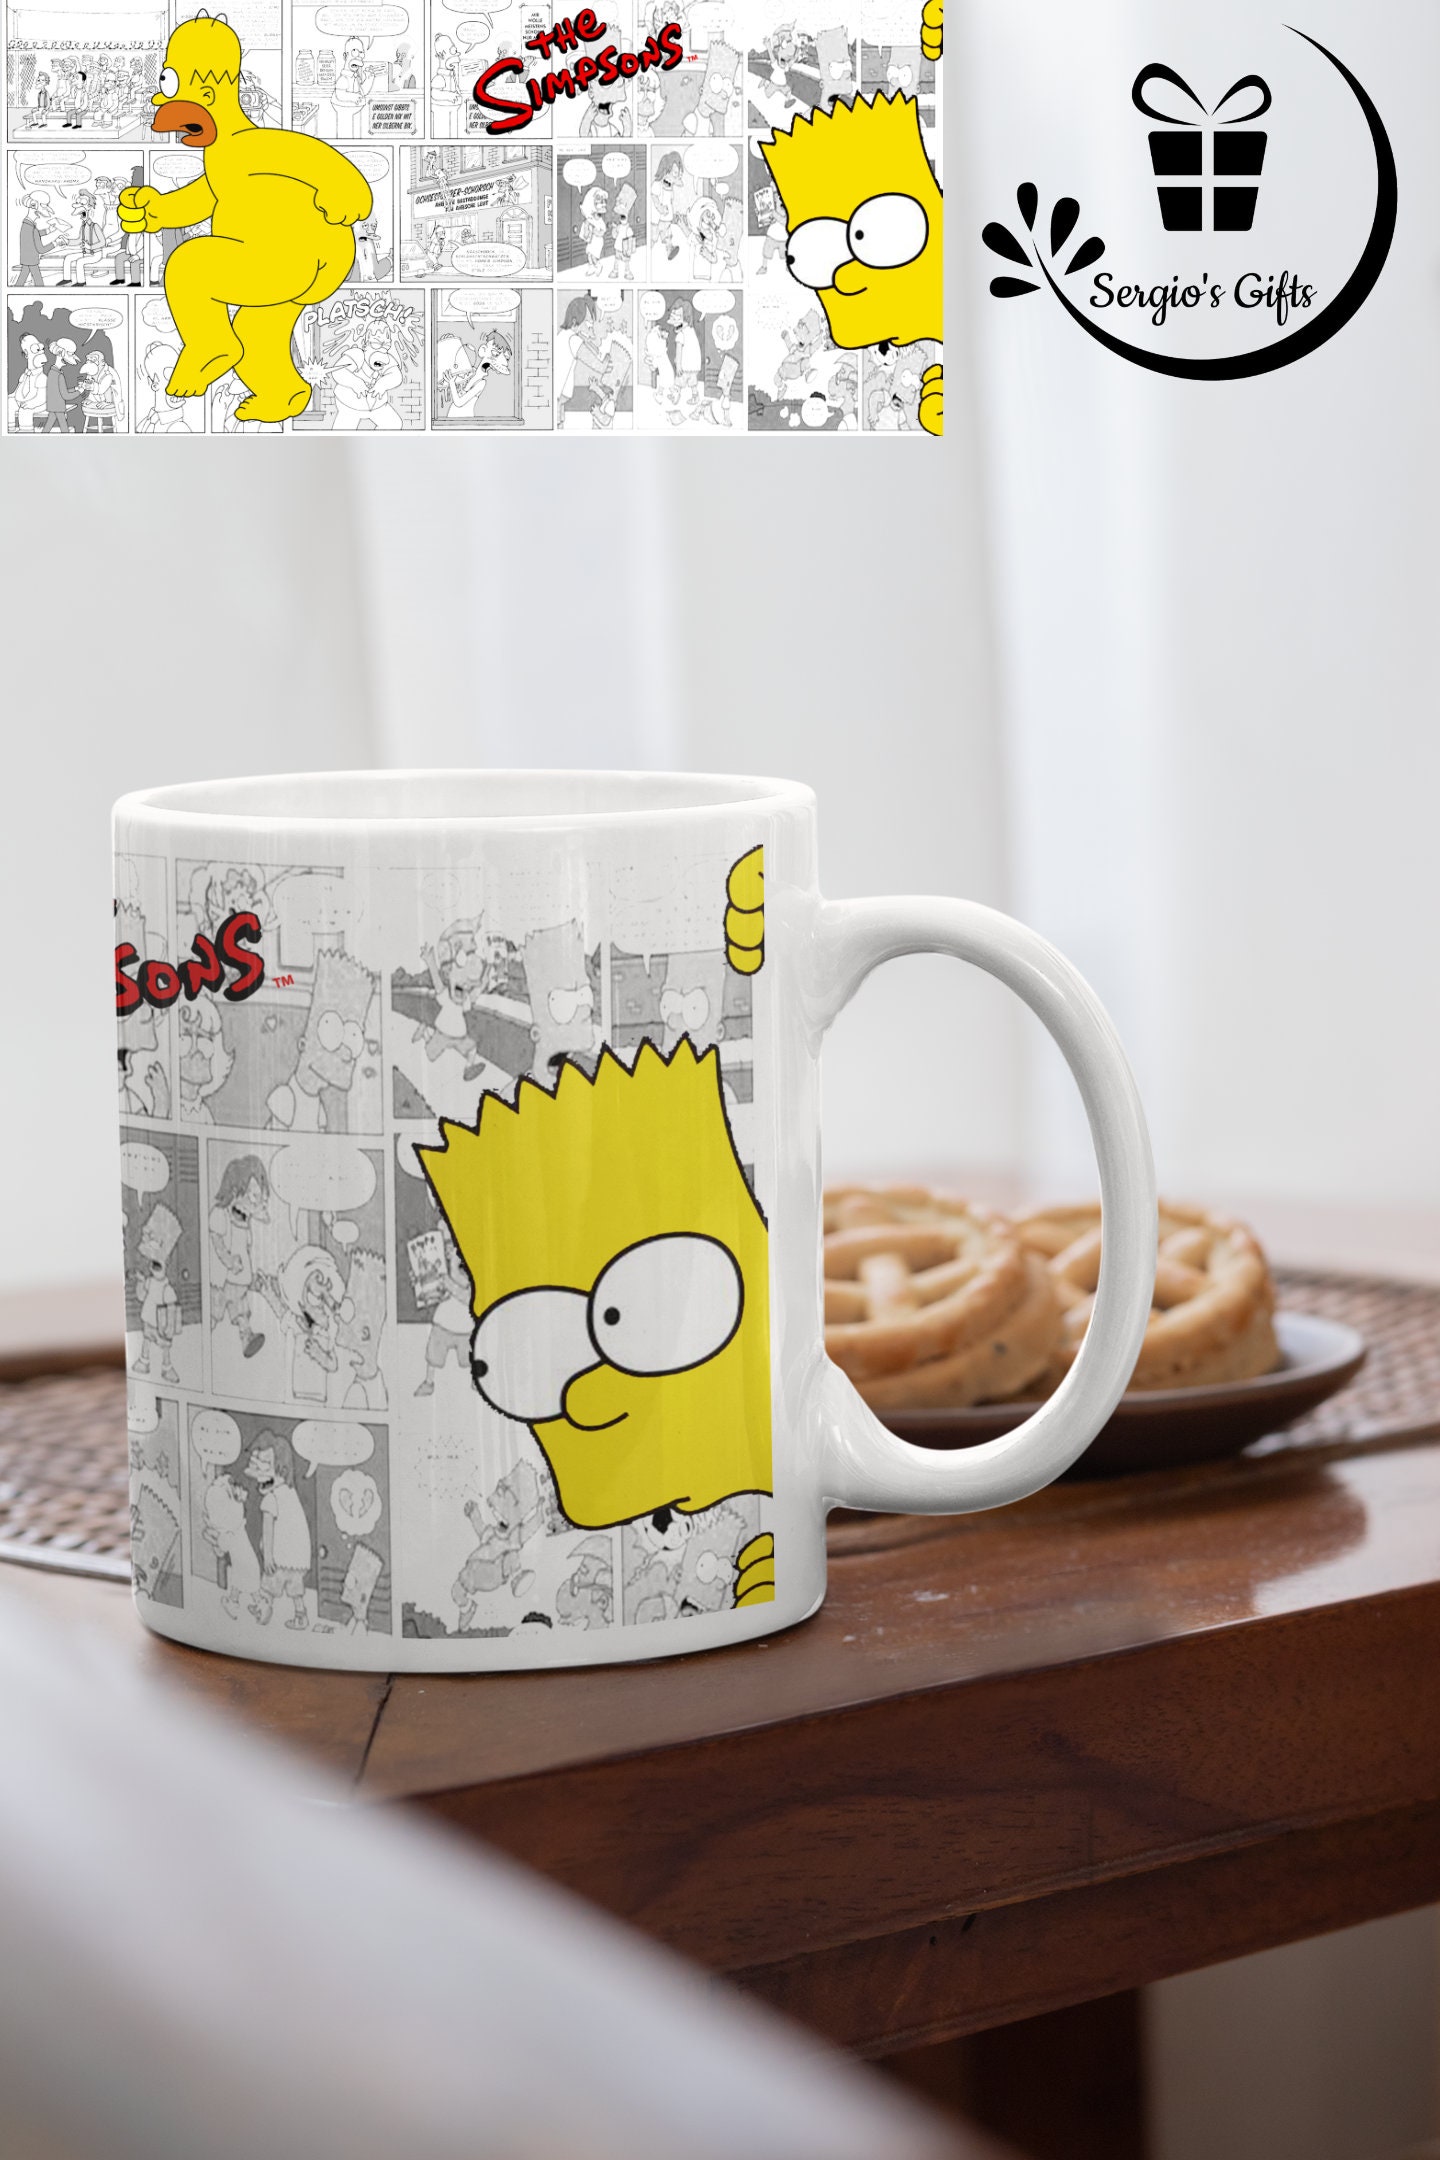 il fullxfull.3908528201 kpao 1 - The Simpsons Shop